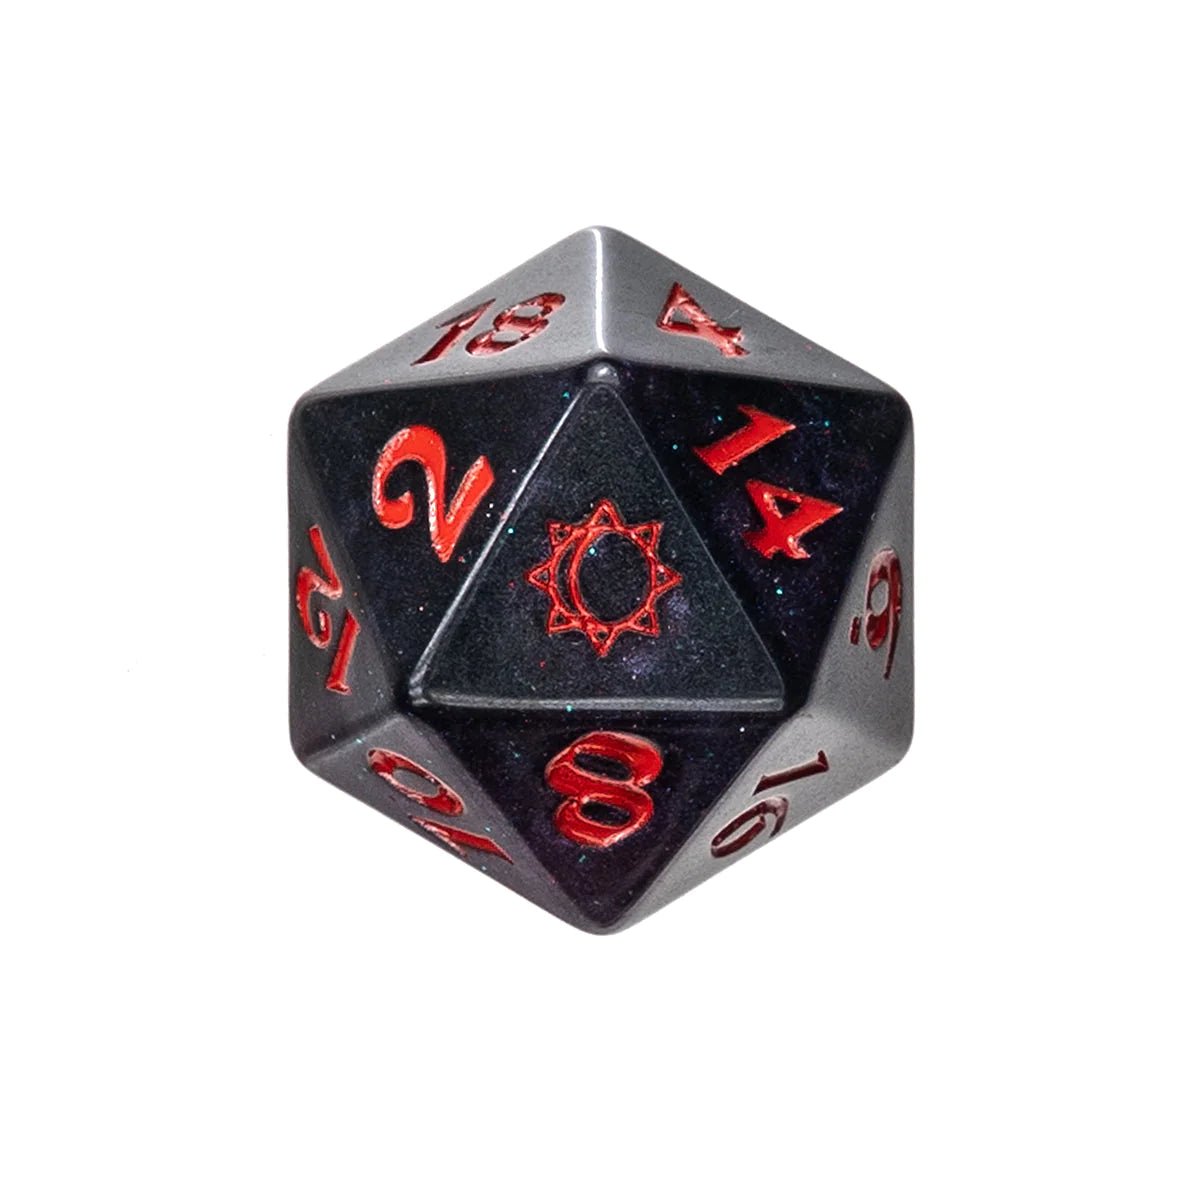 Mighty Nein Dice Set: Mollymauk Tealeaf (Purple/Red) - The Fourth Place